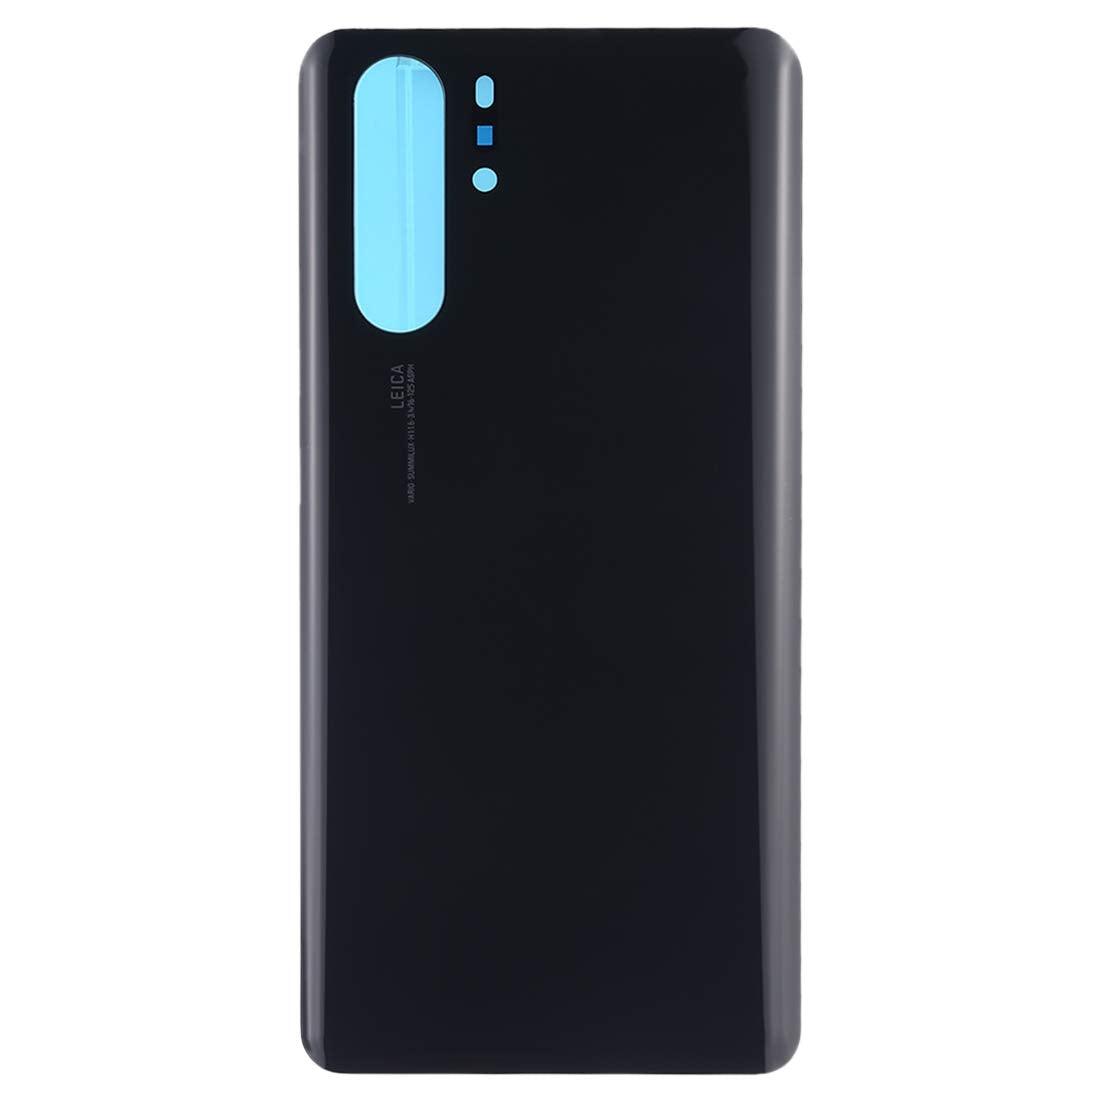 Back Glass Panel for Huawei P30 Pro Black